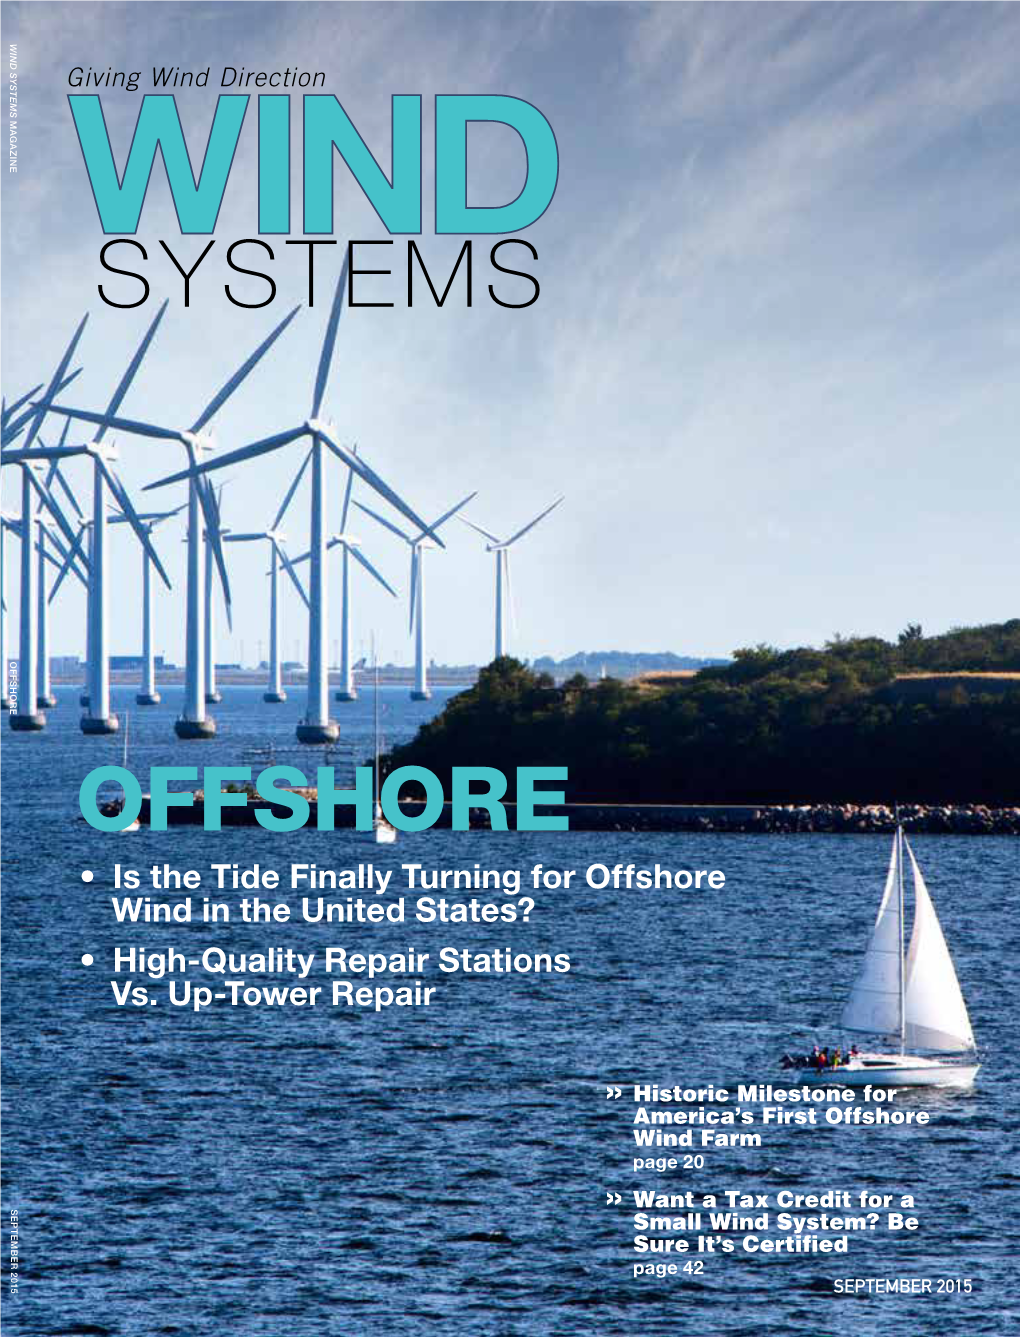 OFFSHORE • Is the Tide Finally Turning for Offshore Wind in the United States? • High-Quality Repair Stations Vs